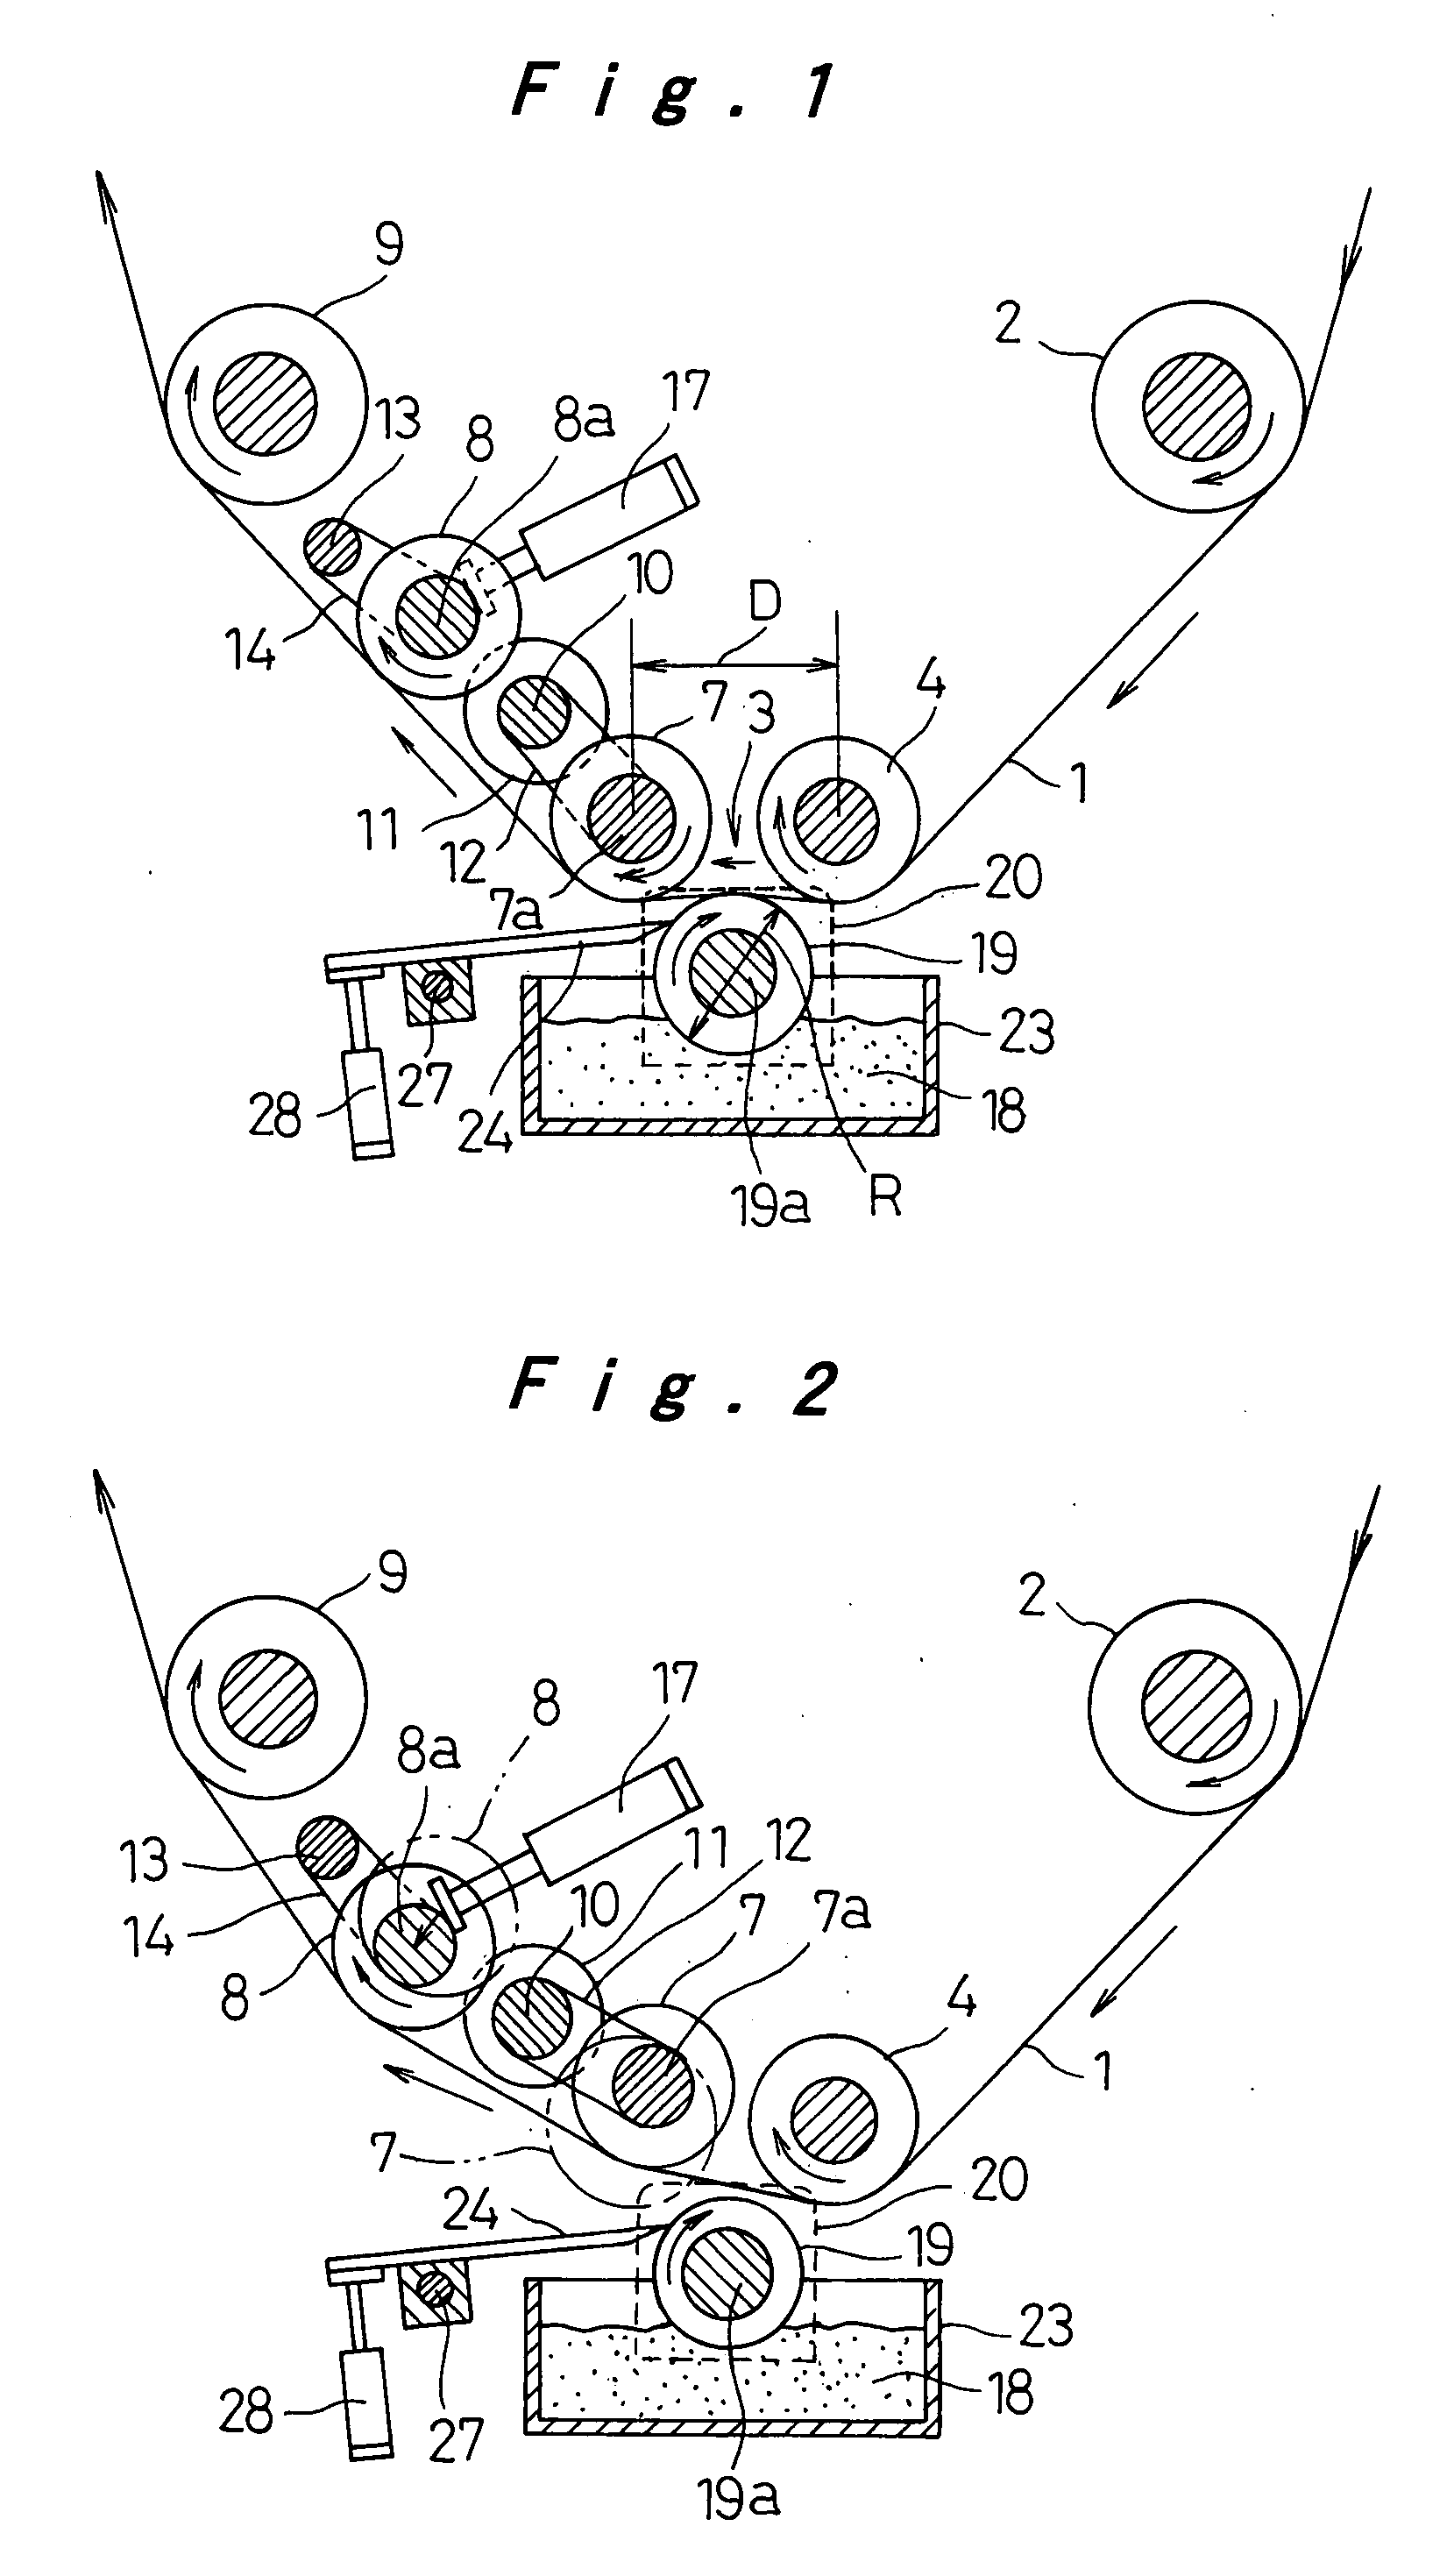 Method for intermittently applying thin-film coatings